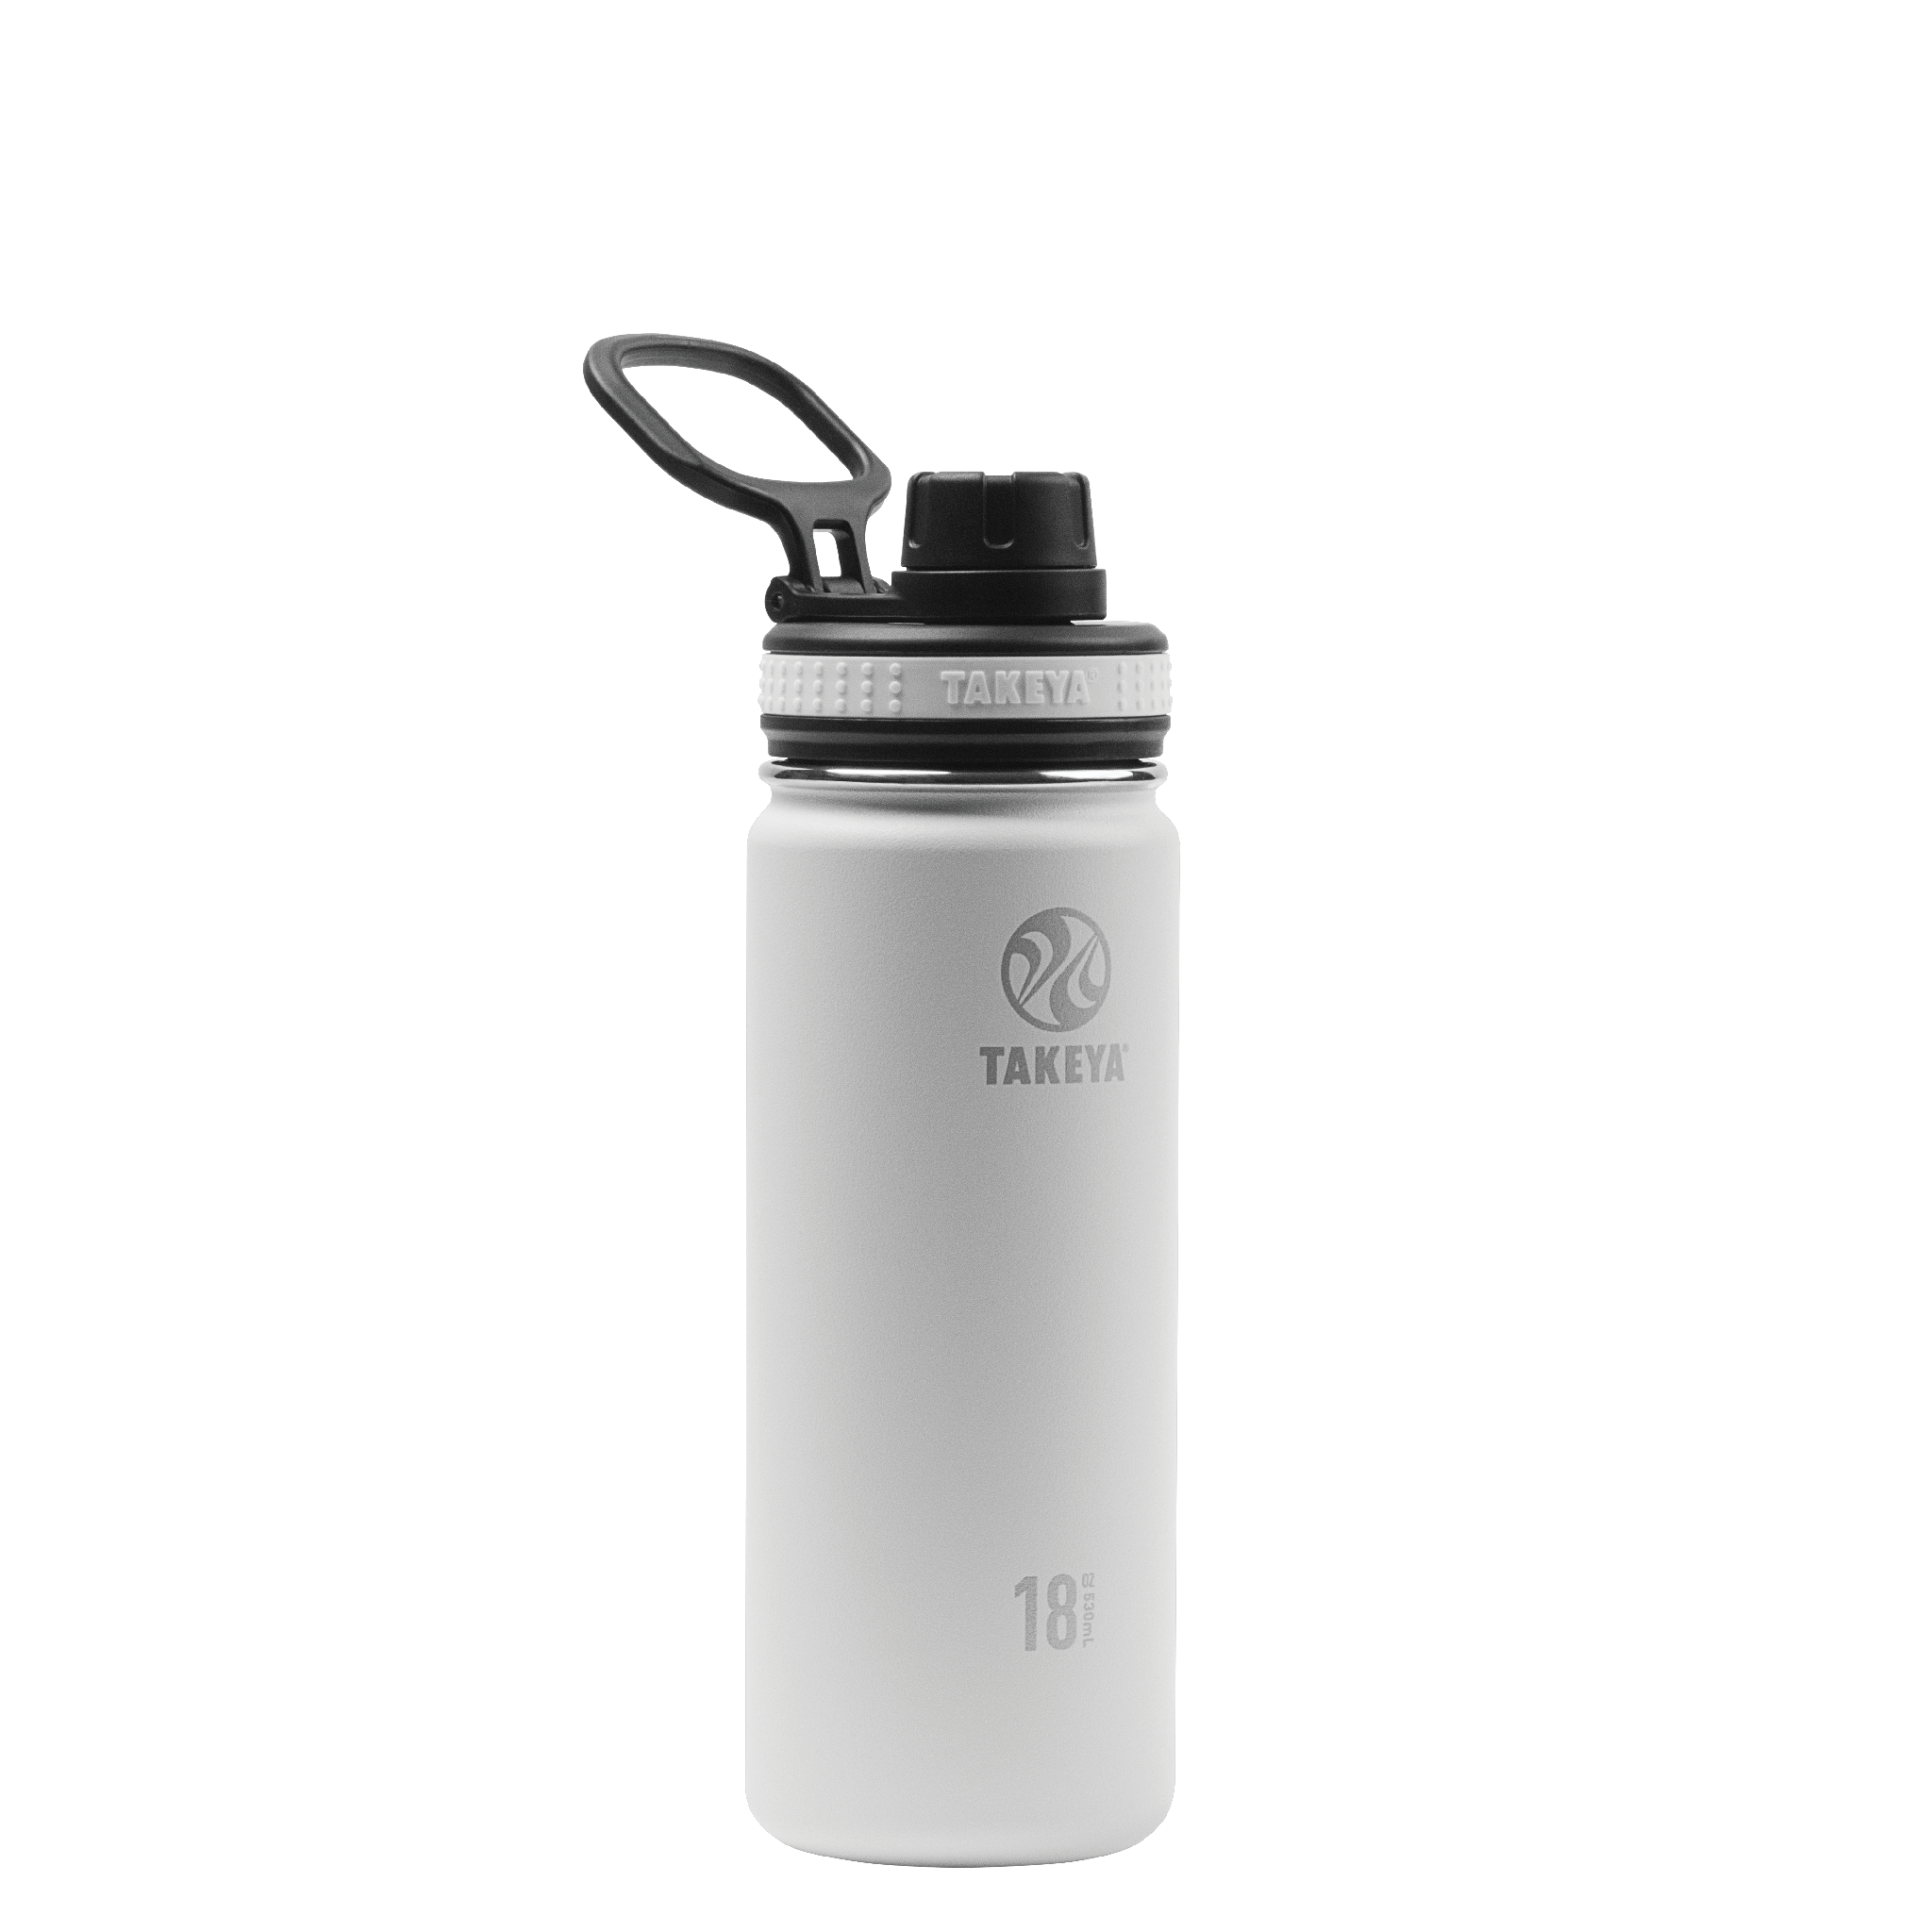 Takeya 32oz Actives Insulated Stainless Steel Water Bottle With